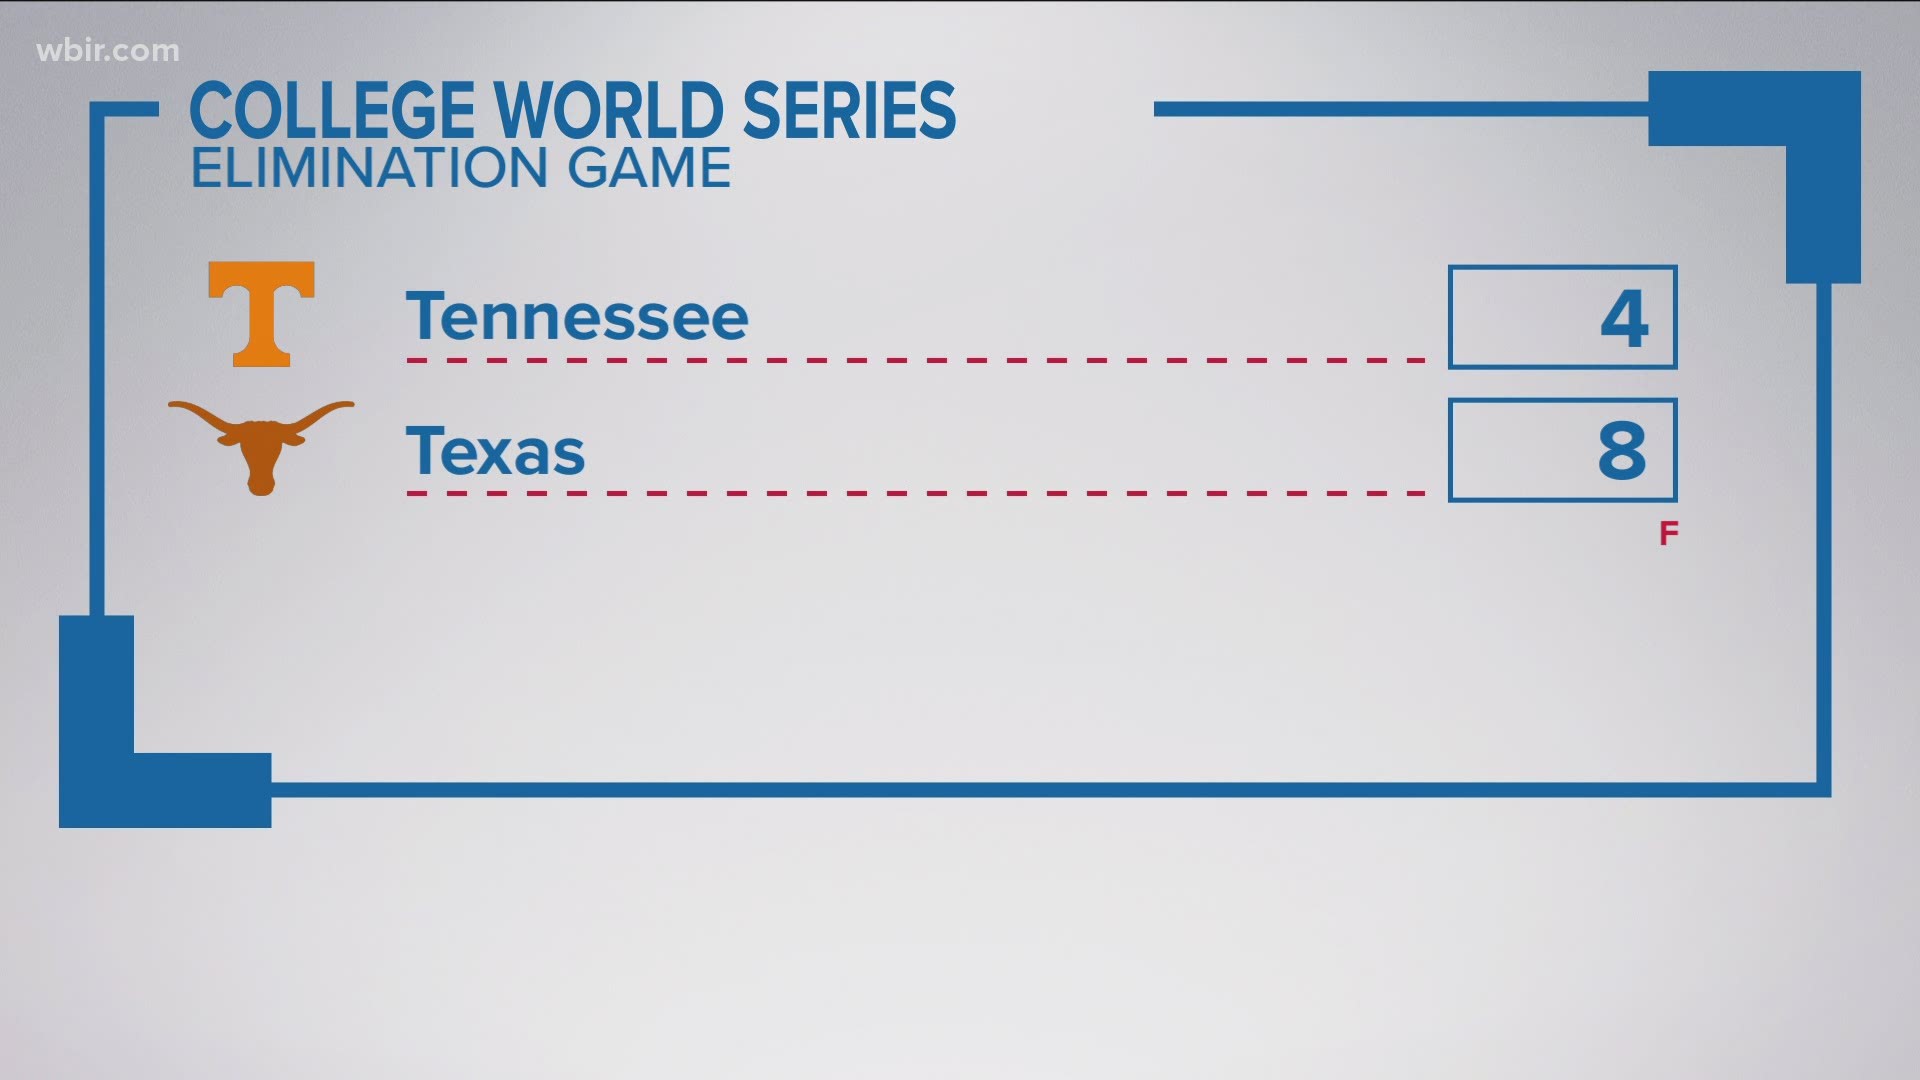 The Vols are officially out of the College World Series after losing to Texas on Tuesday.